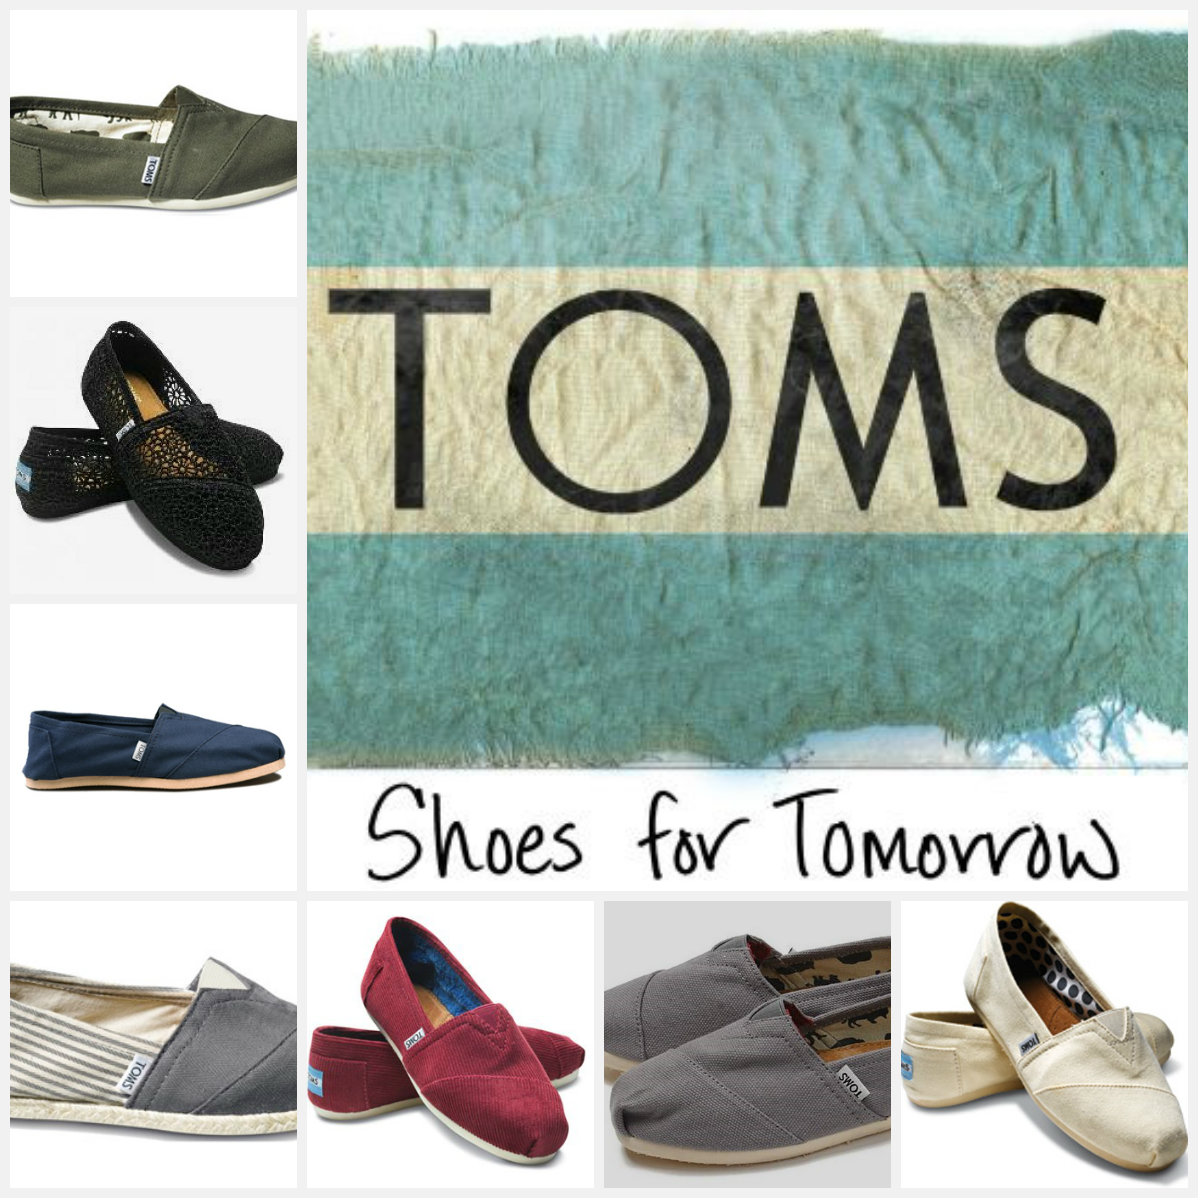 choose happiness: Toms and Bobs